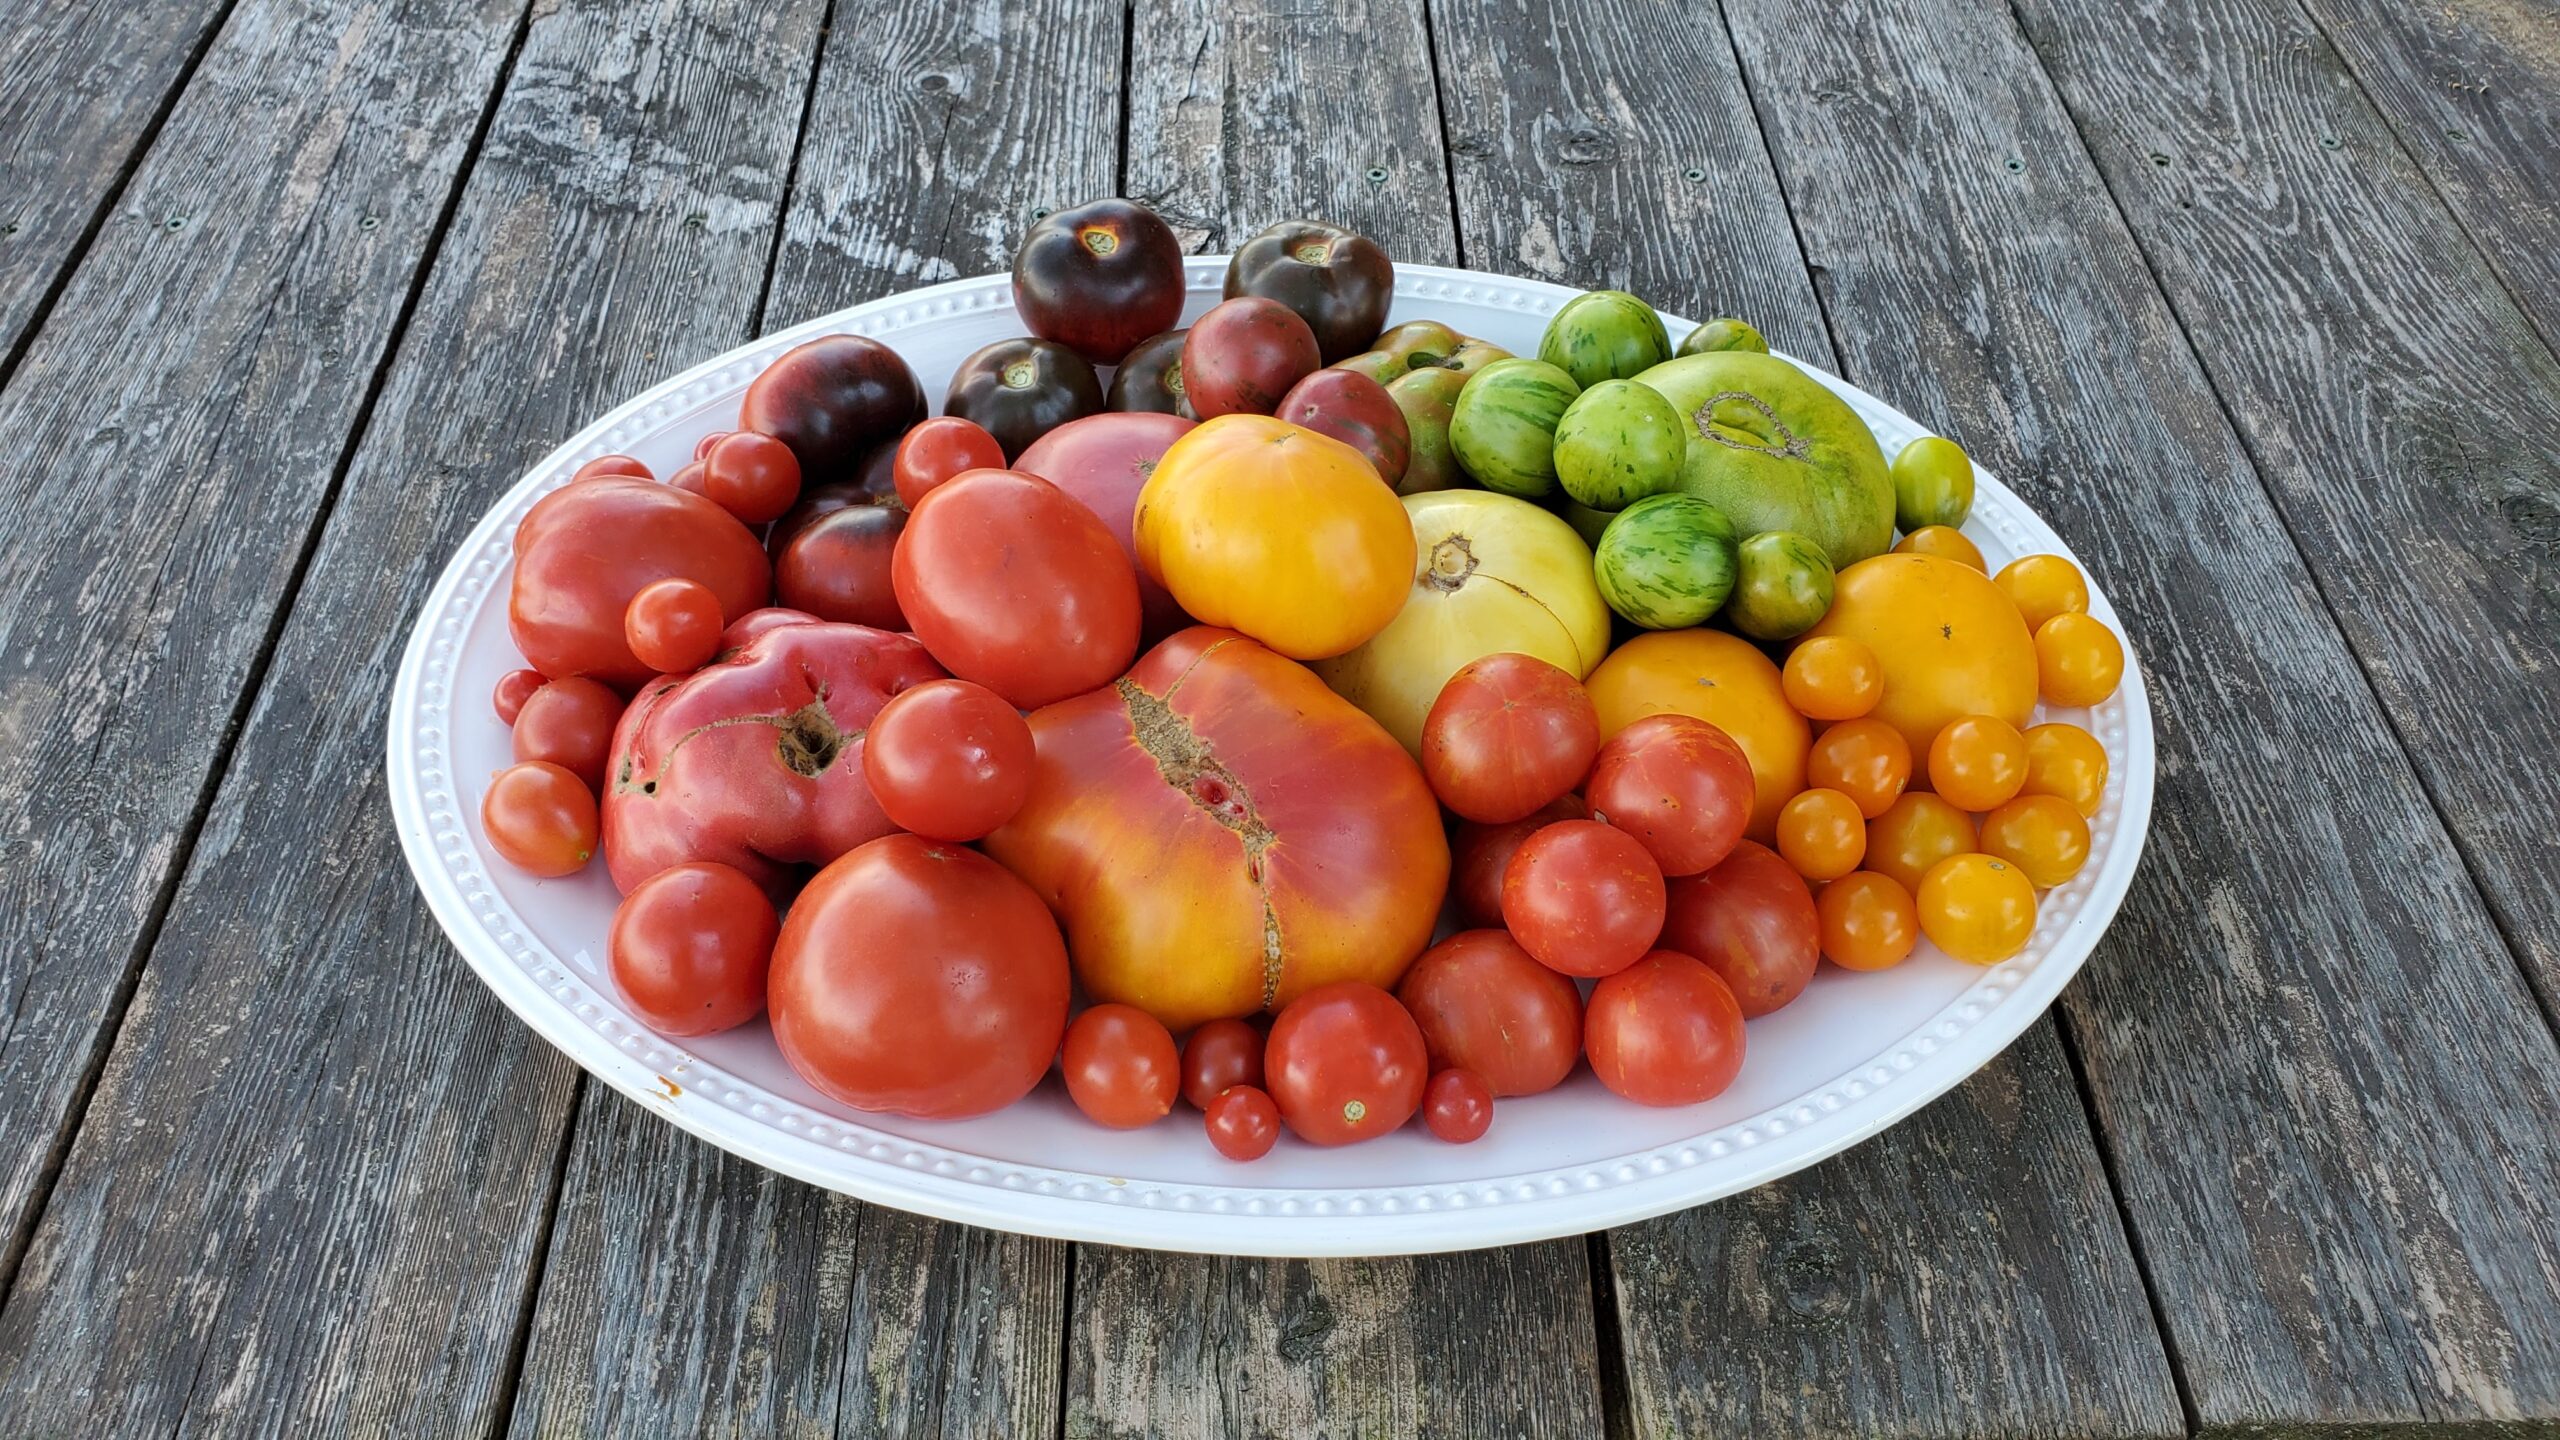 Heirloom Tomatoes of various colors on a tray.